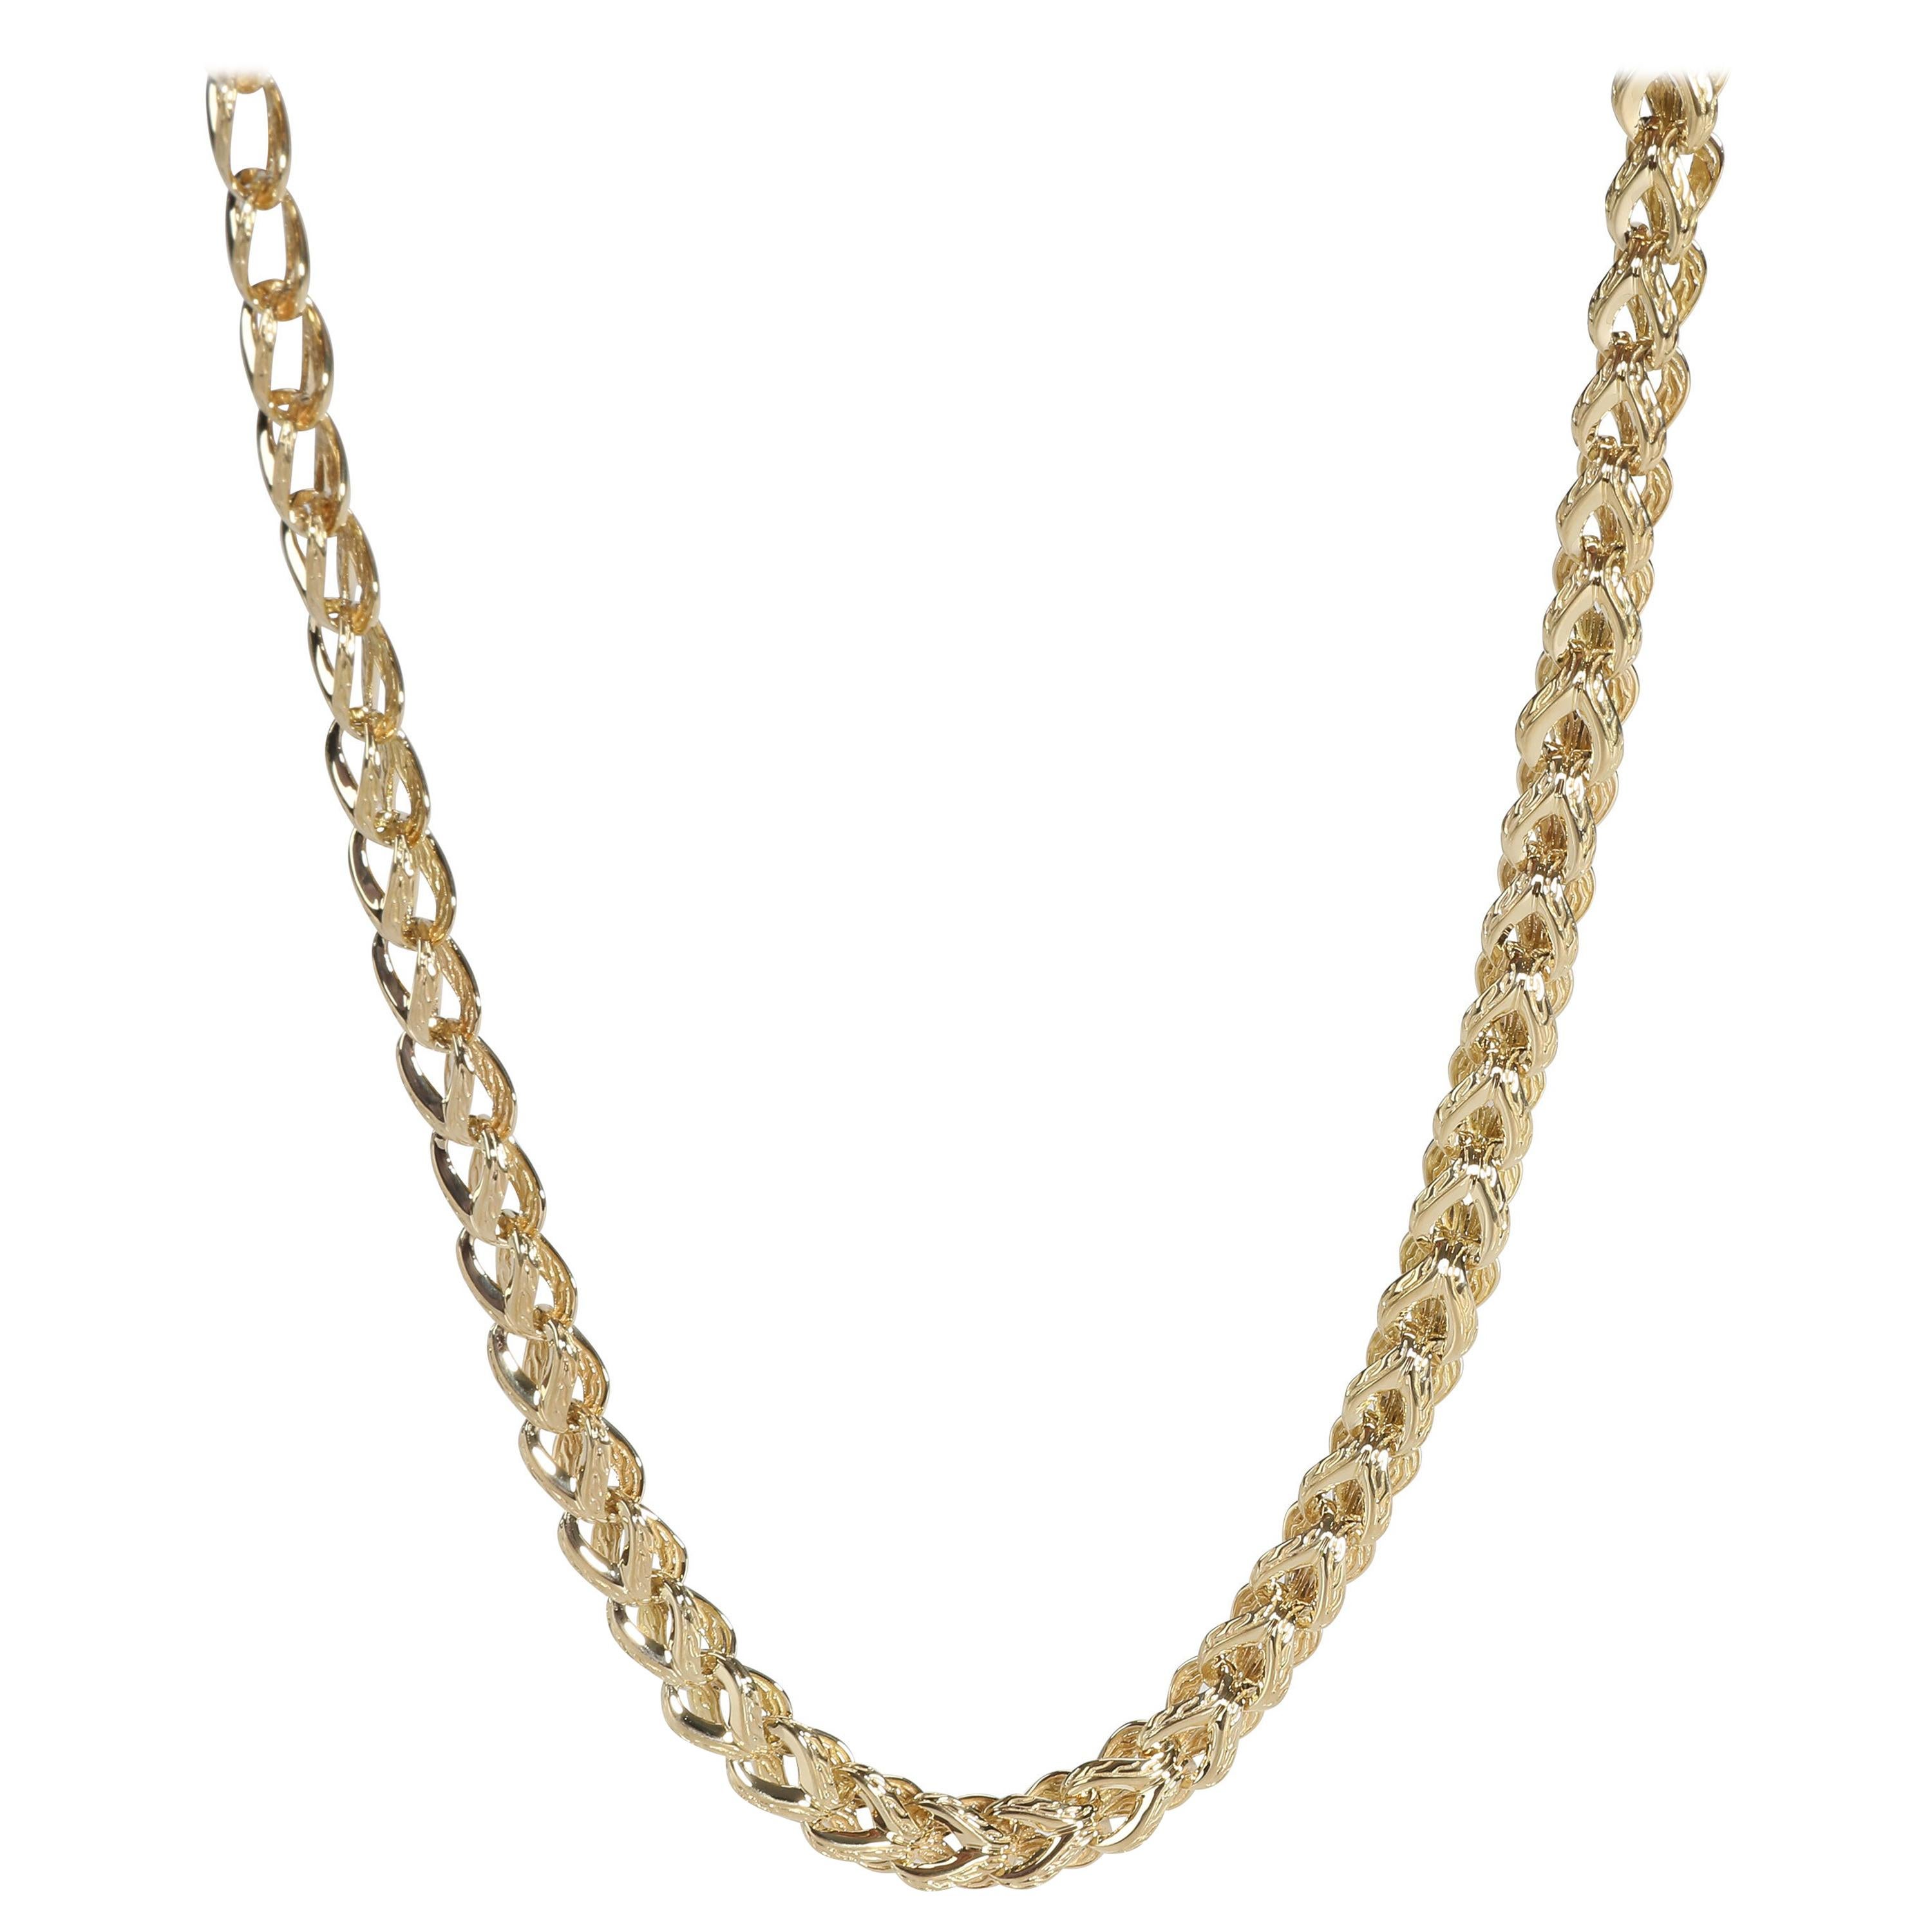 John Hardy Chain Necklace in 18K Yellow Gold